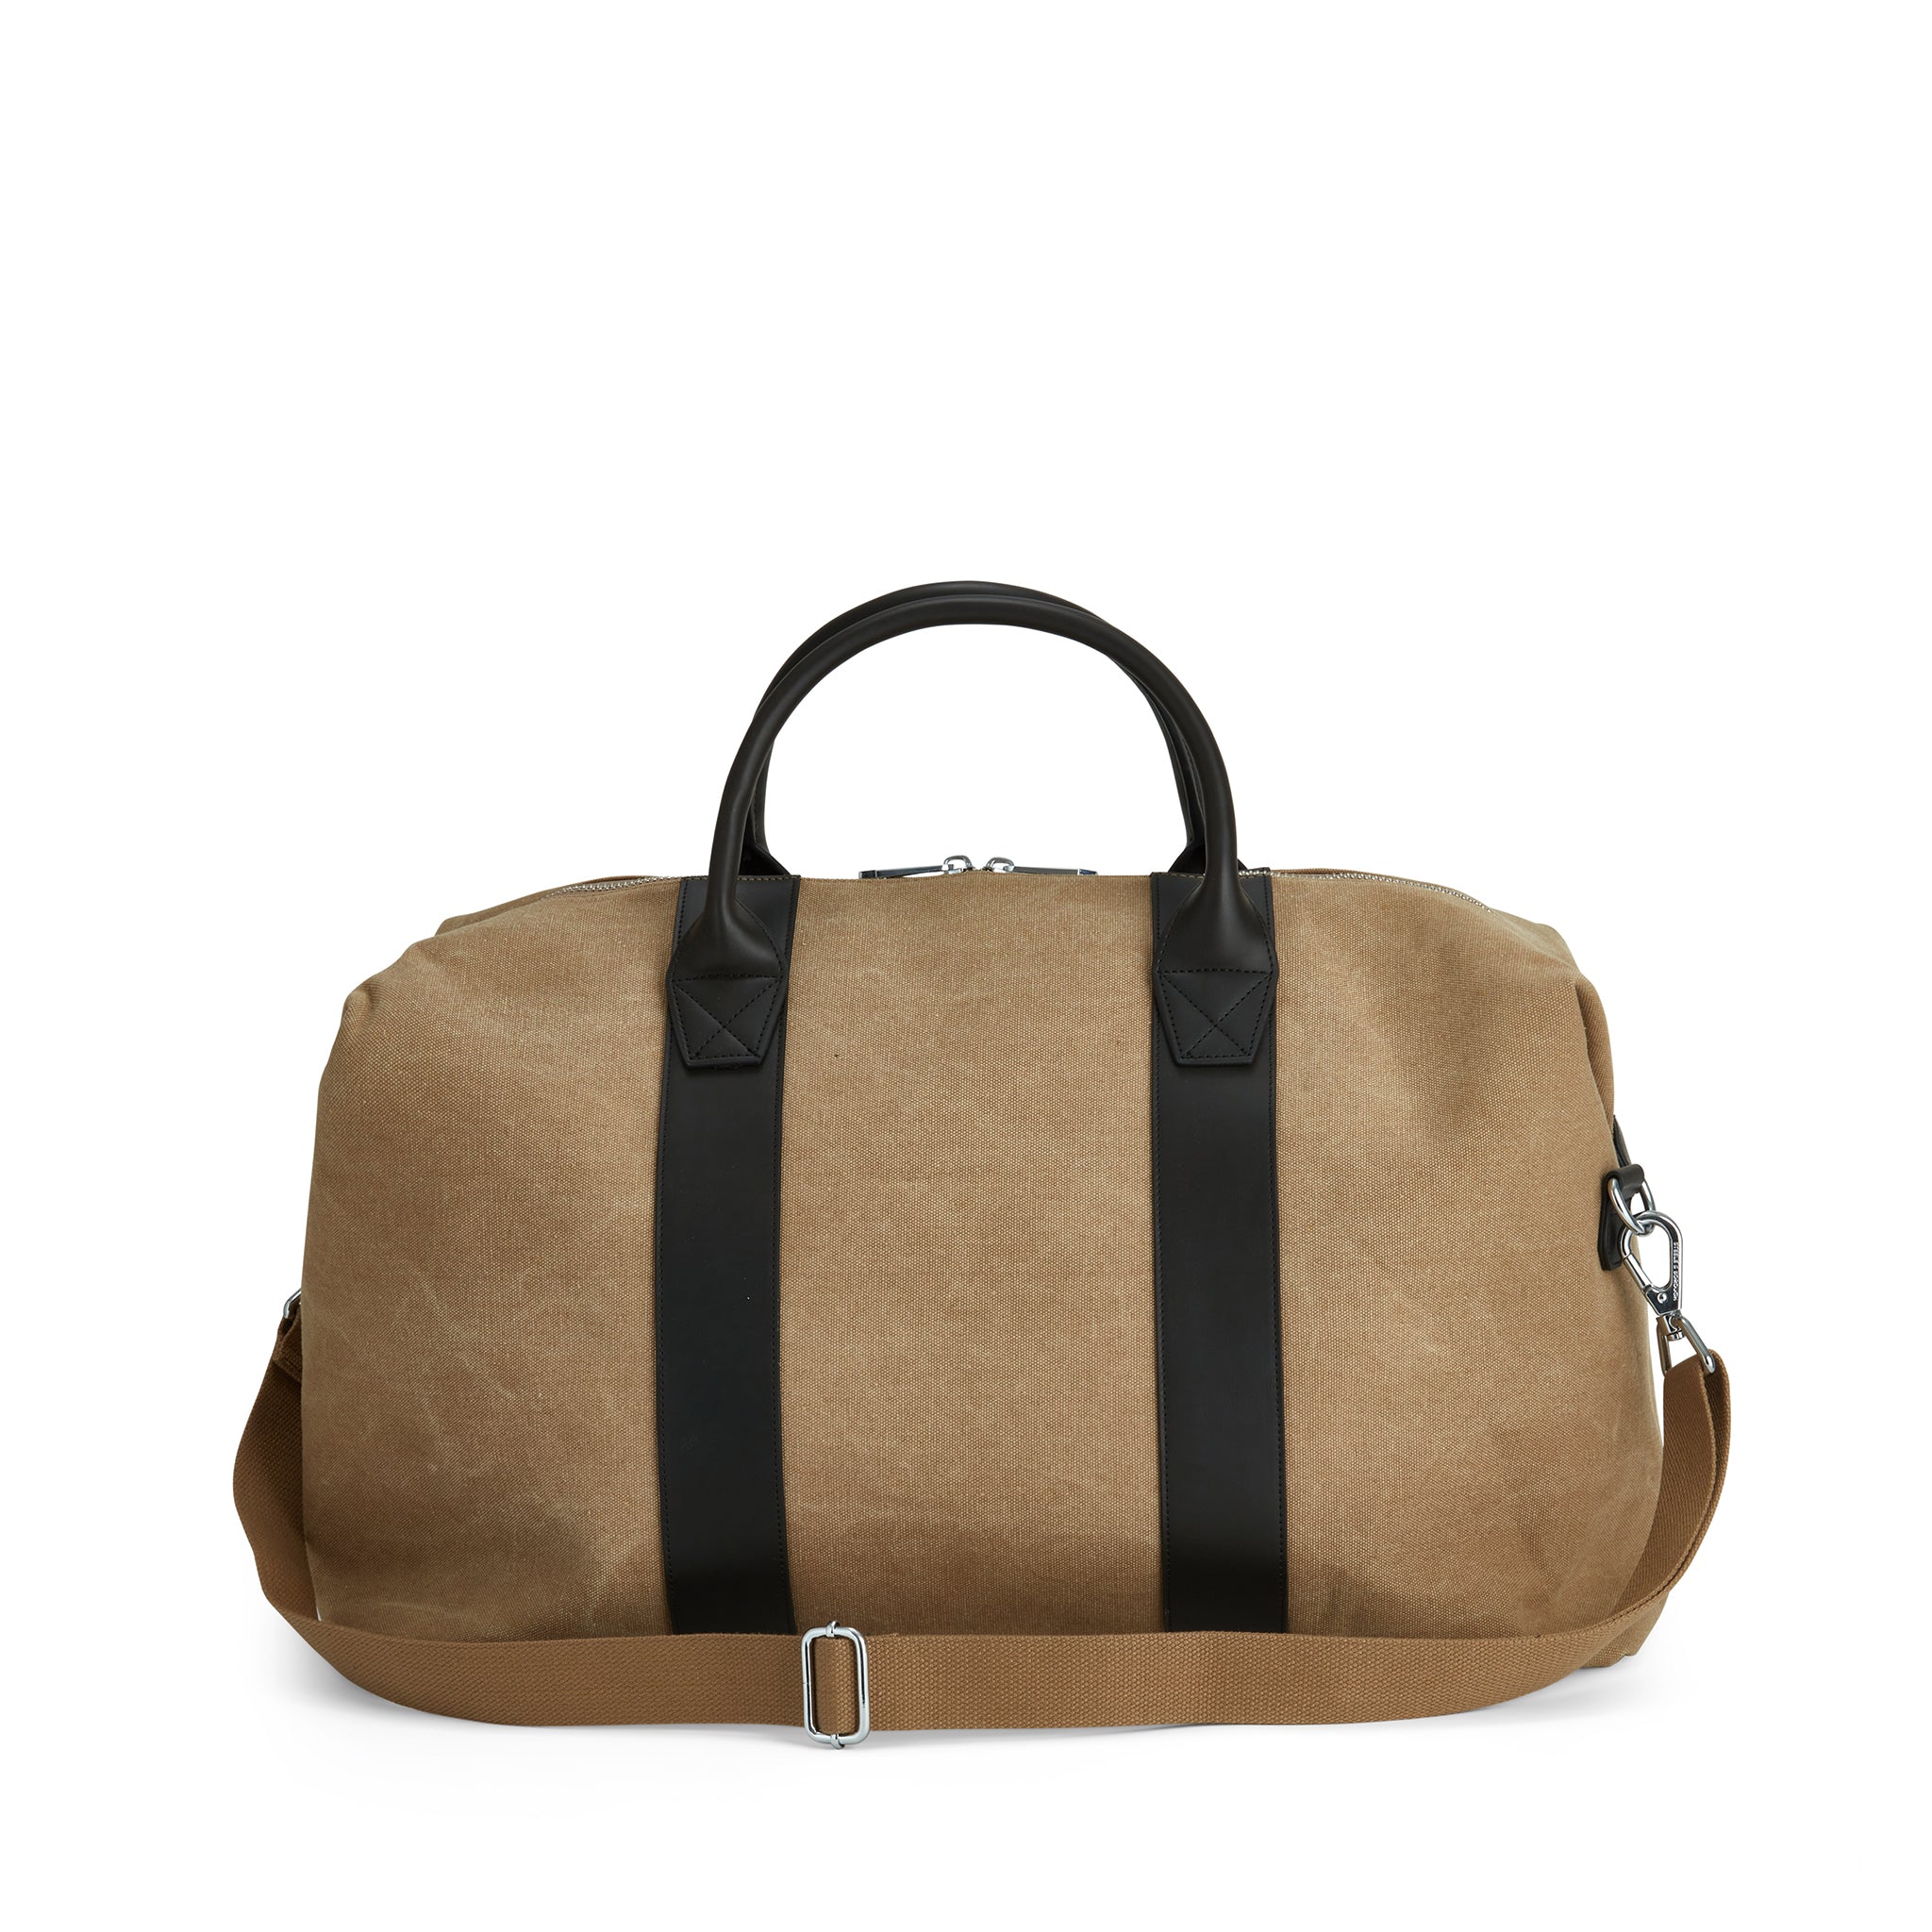 Khaki Overnight Bag featured on a white background, ideal for short trips and stylish getaways